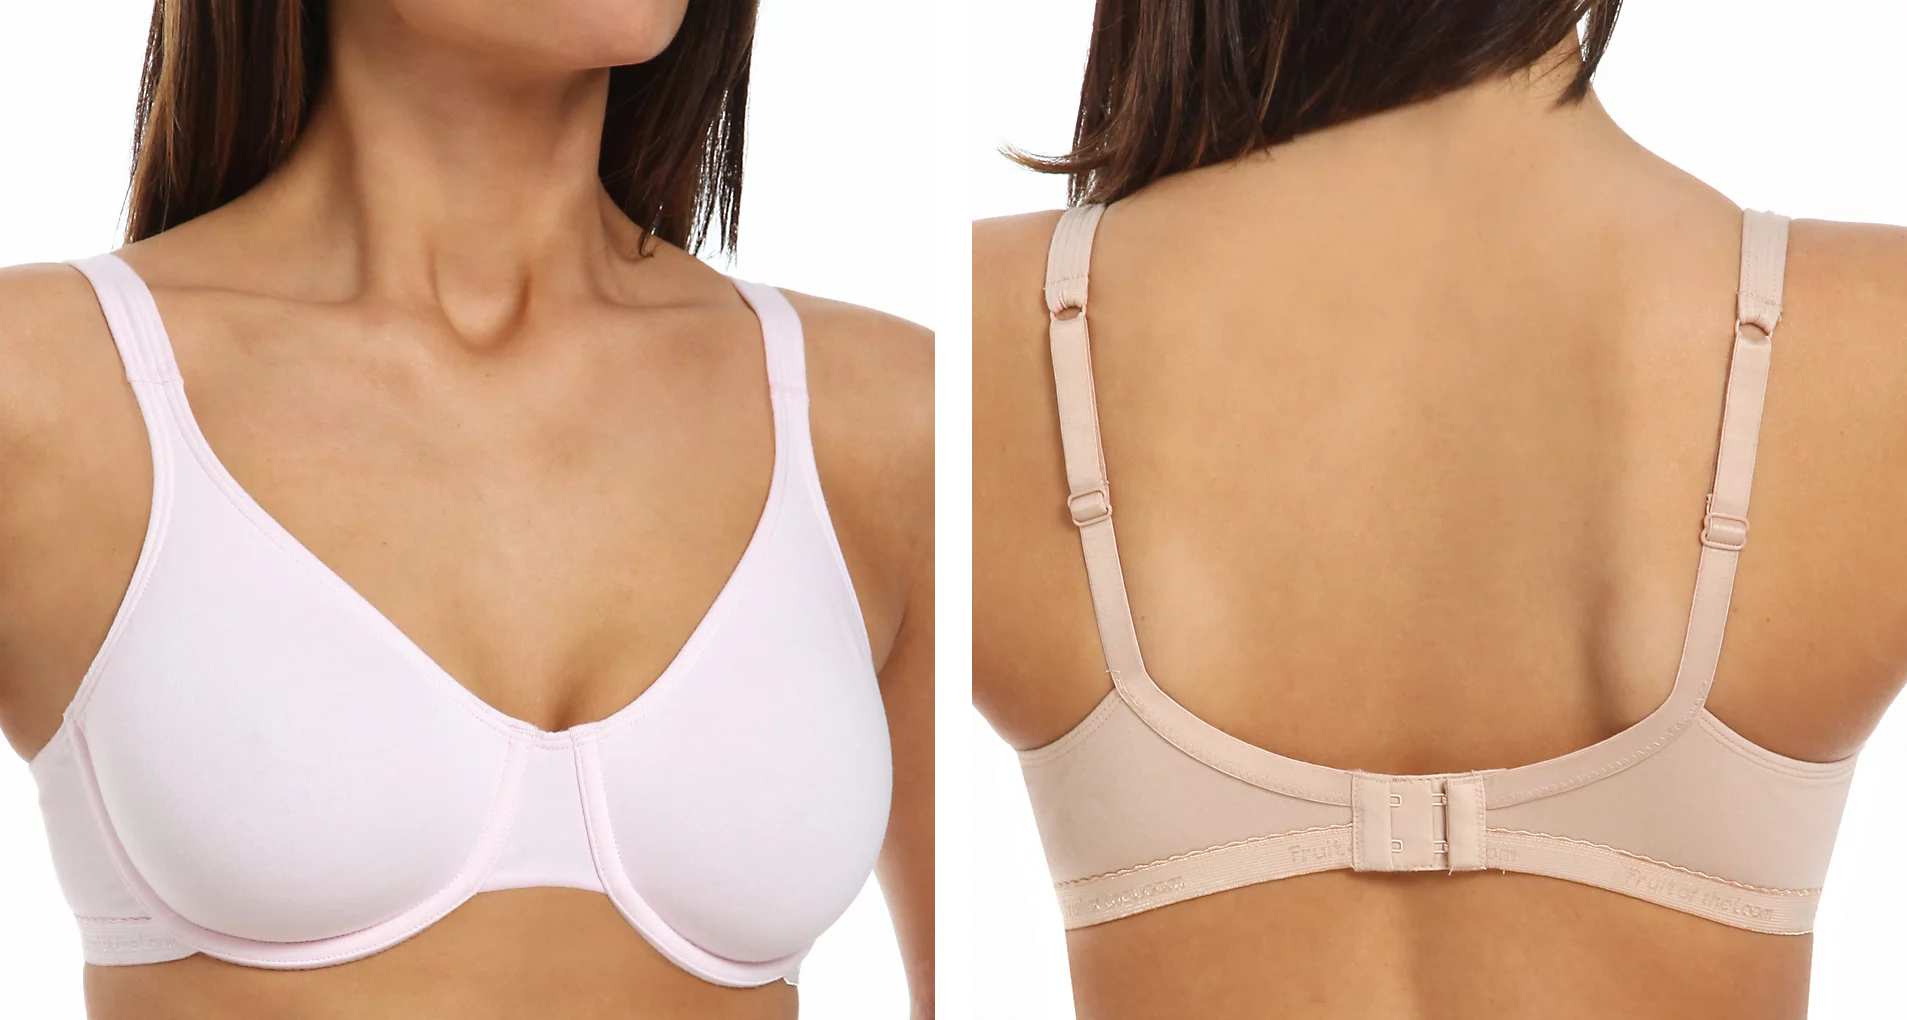 How to Find the Best Bra Fit